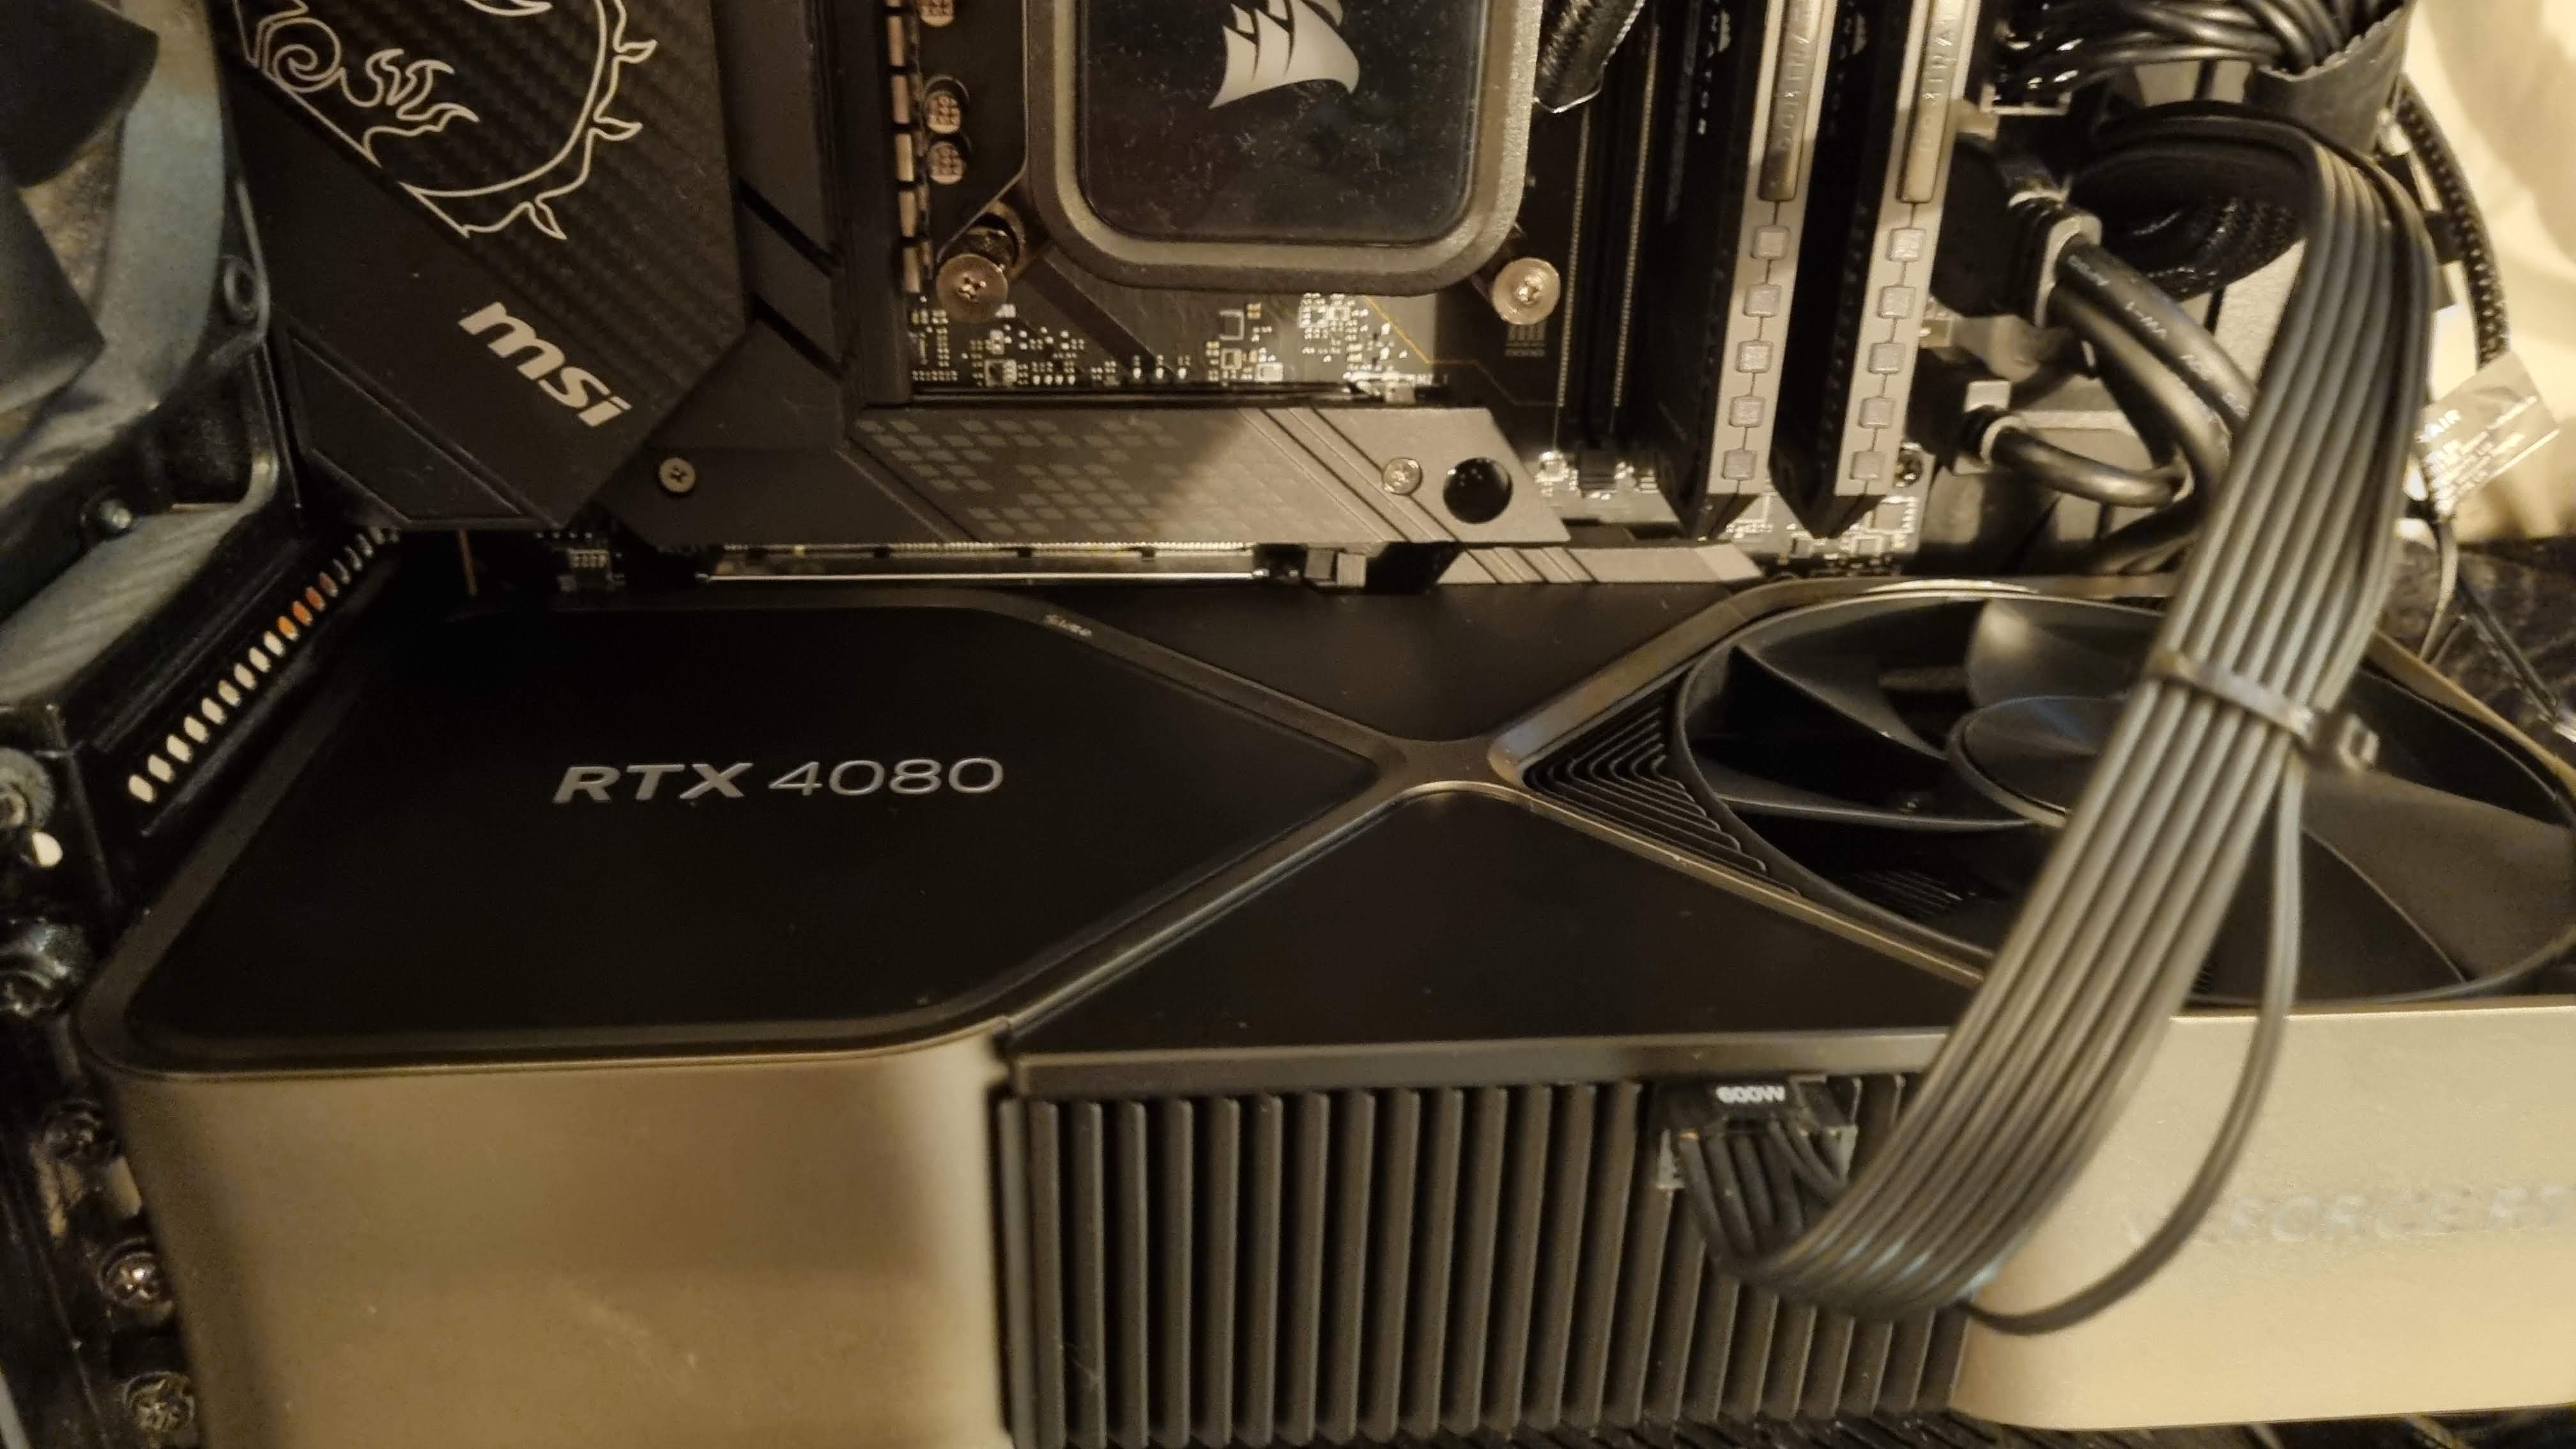 RTX 4080 GPU installed in a motherboard